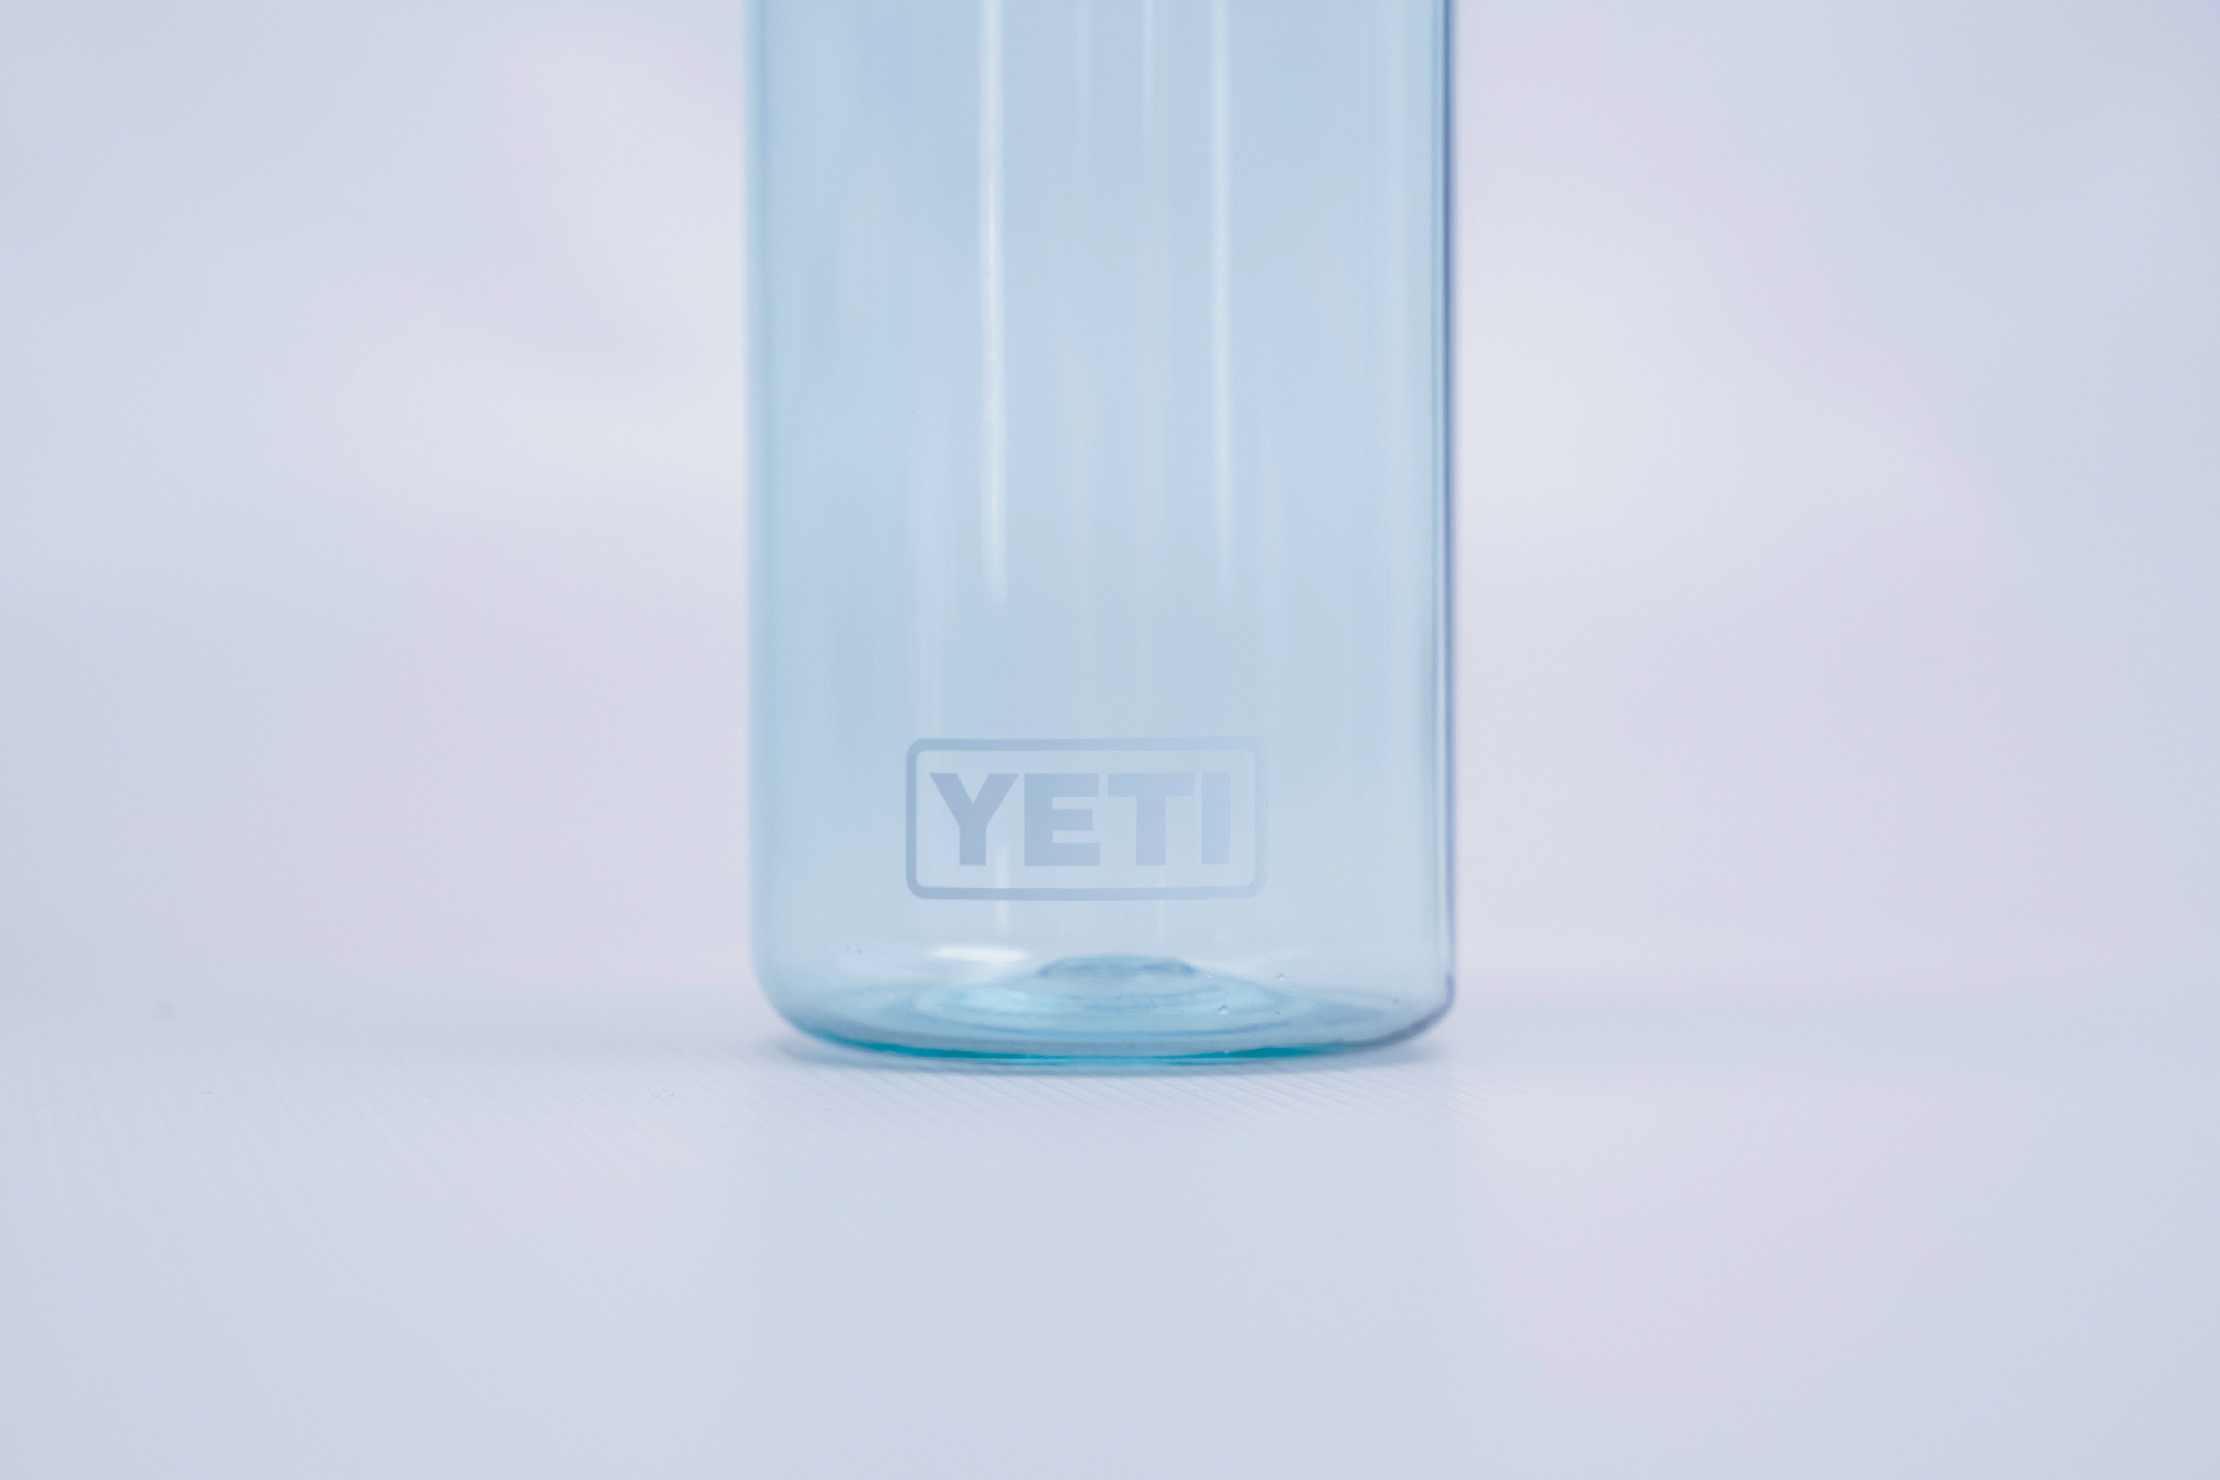 Yeti Yonder Review: I Tried the Non-Insulated Water Bottle